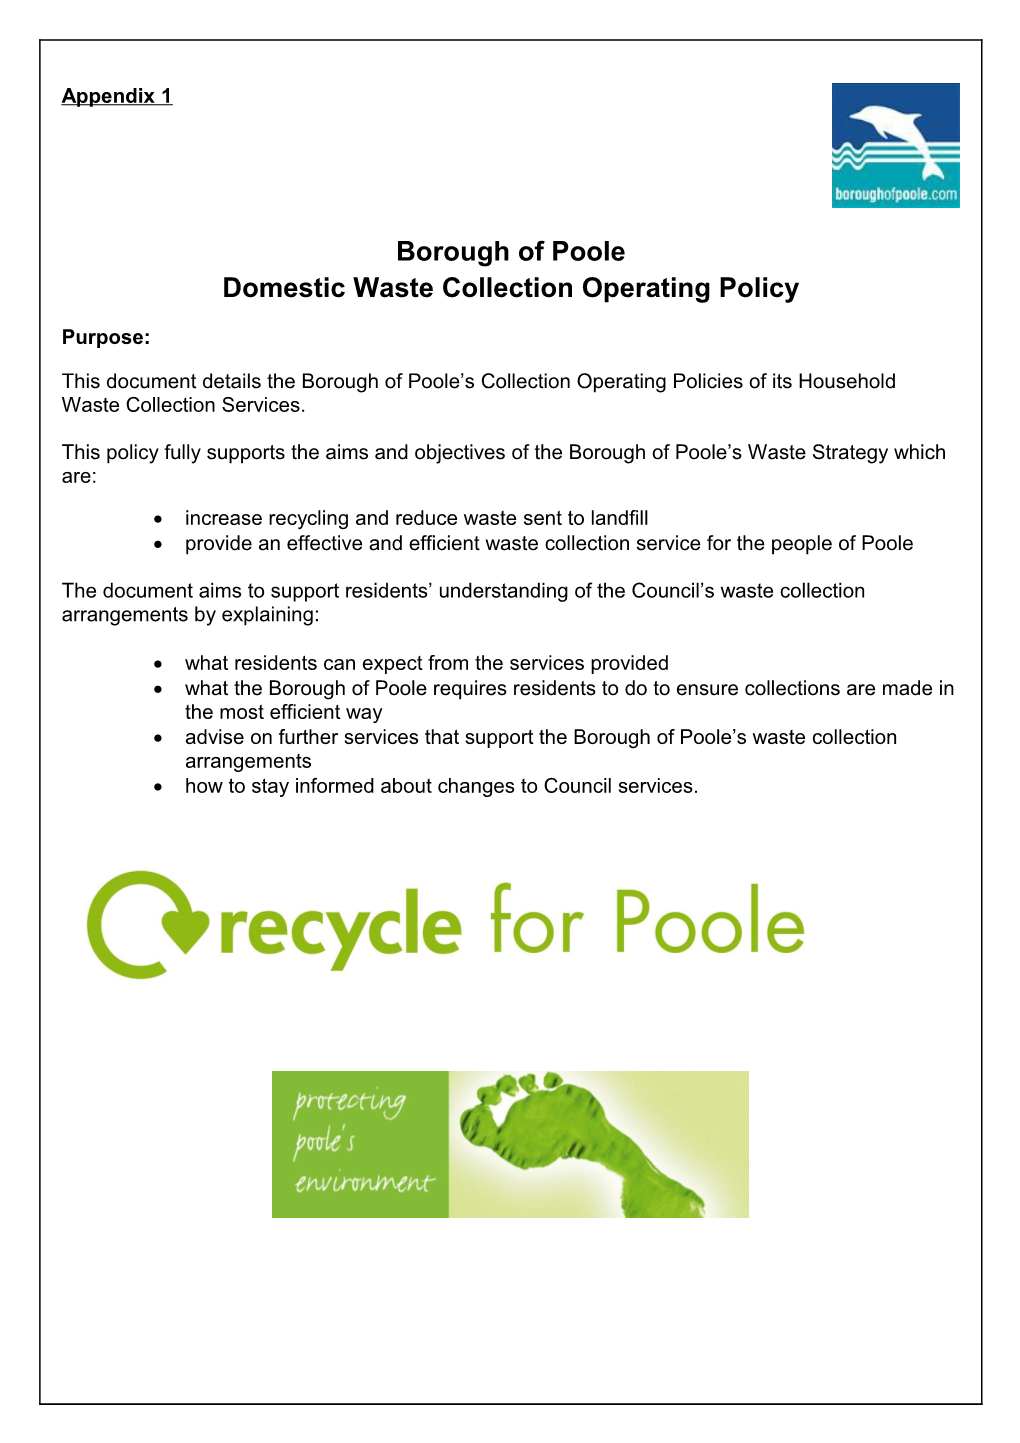 Borough of Poole Domestic Waste Collection Operating Policy